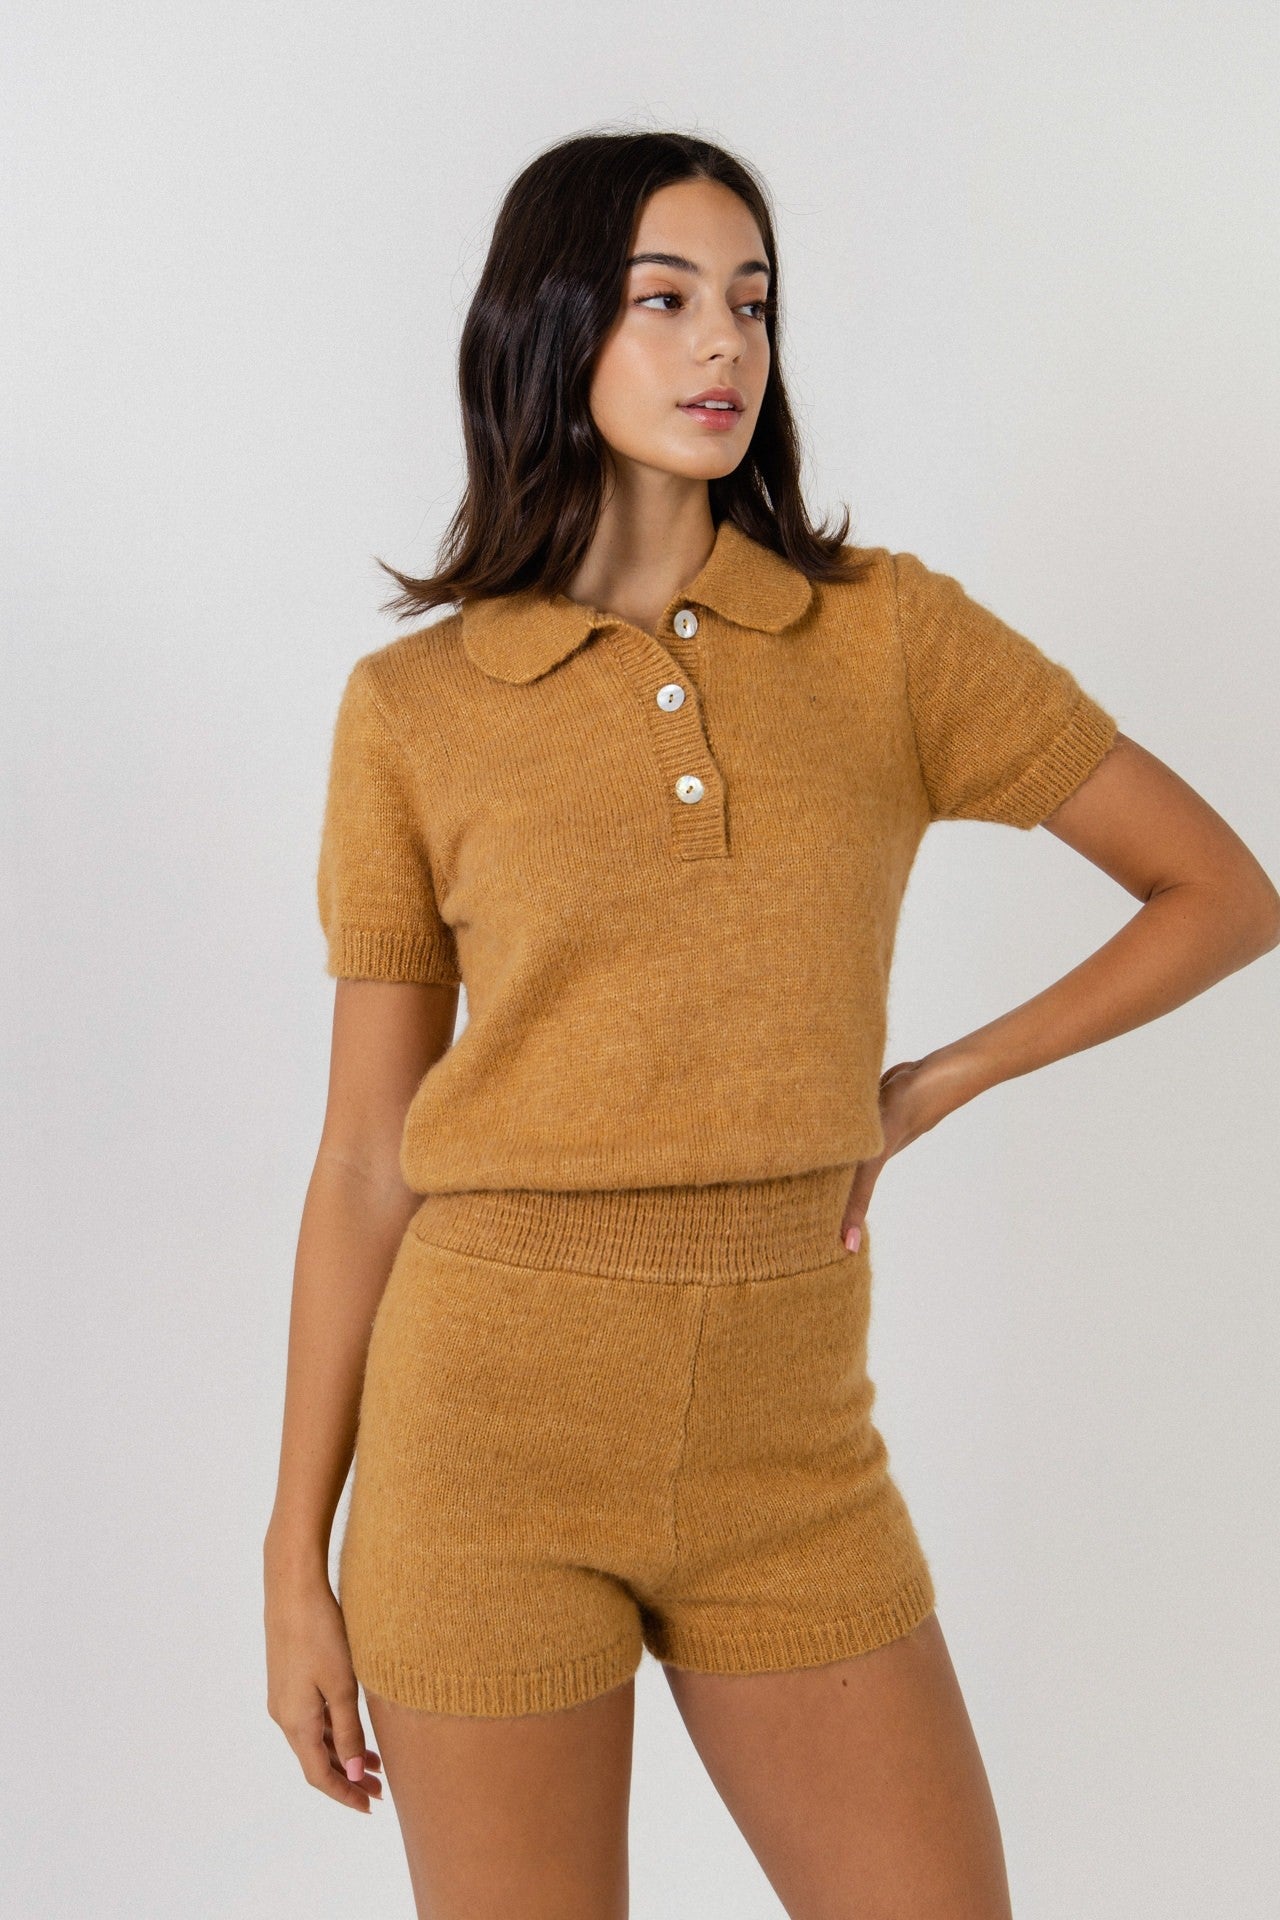 UNIKONCEPT Lifestyle Boutique and Lounge; Model wearing Cozy Chalet Romper in gold by English Factory - a knit romper with short sleeves and polo button collar